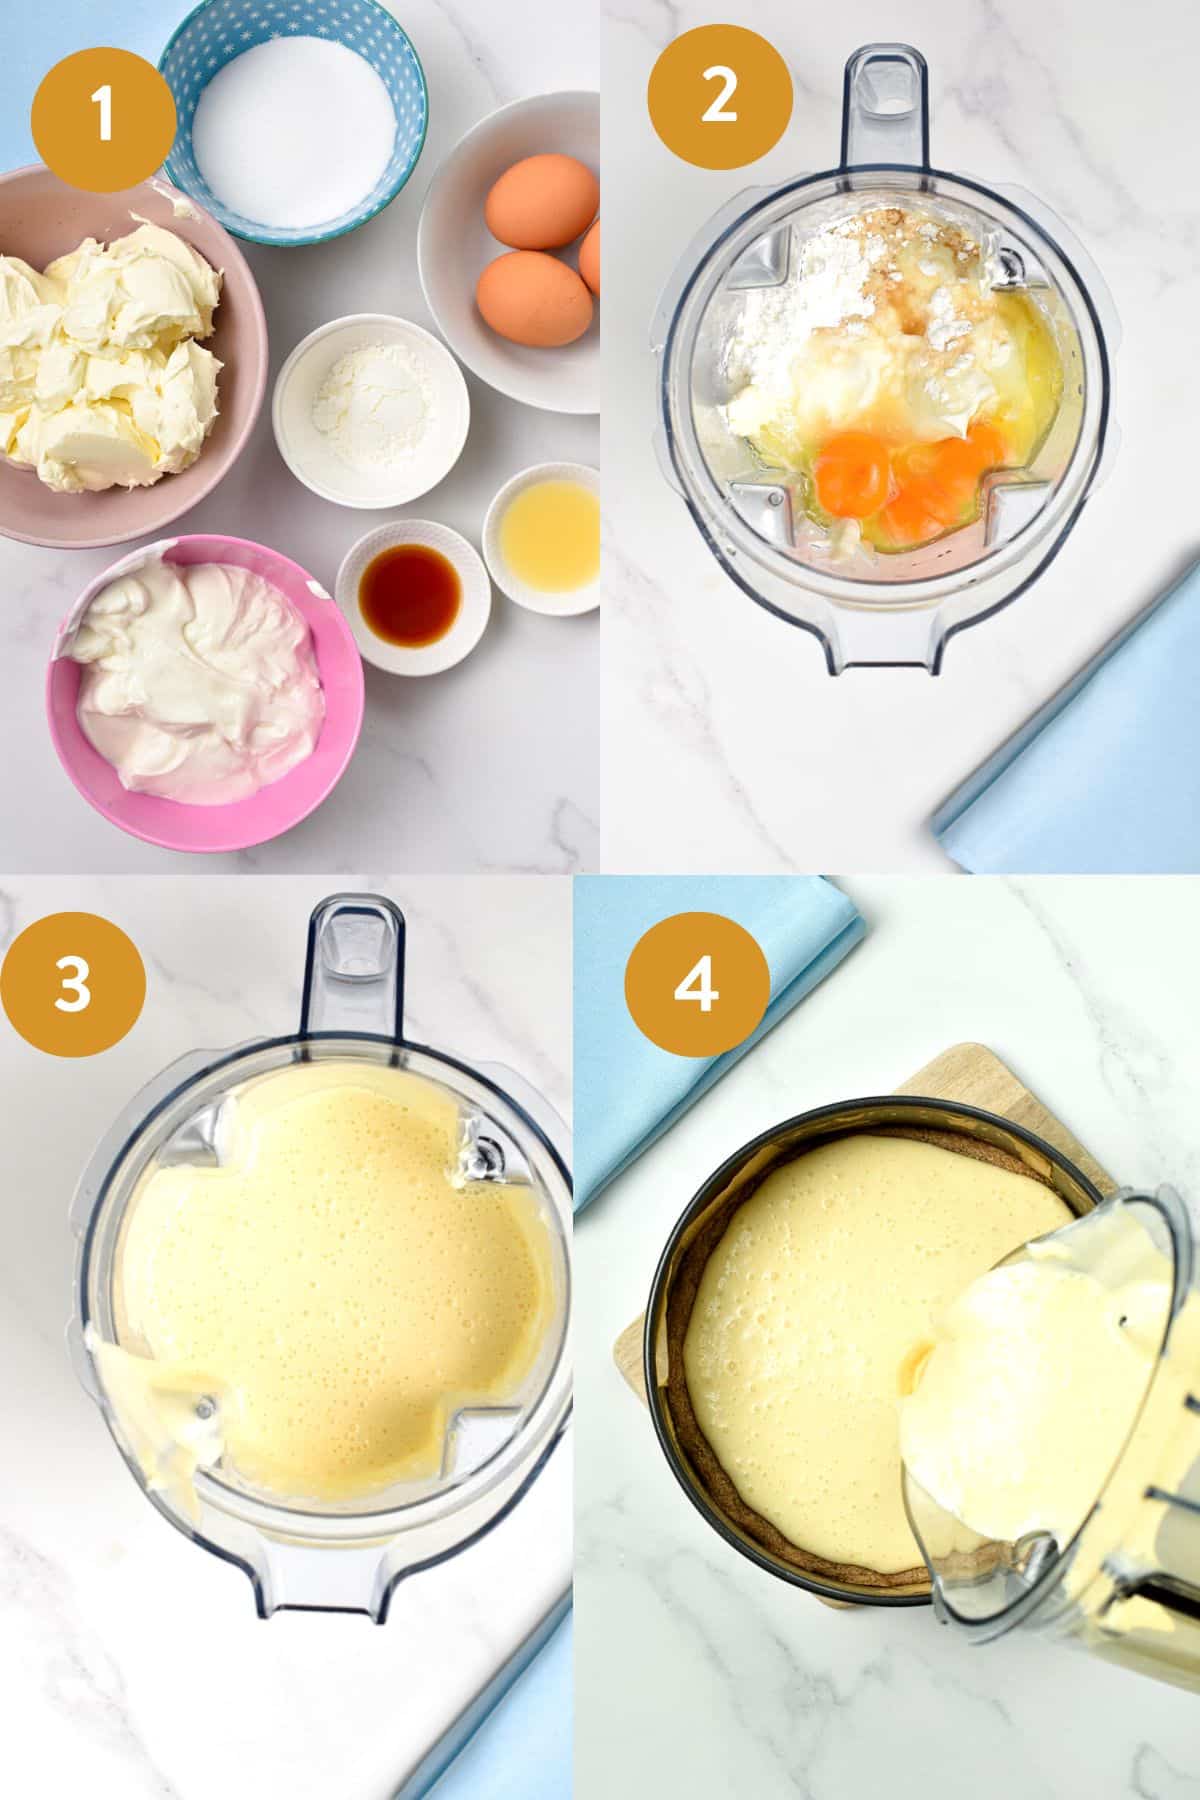 Step-by-step instructions to making the healthy cheesecake filling.